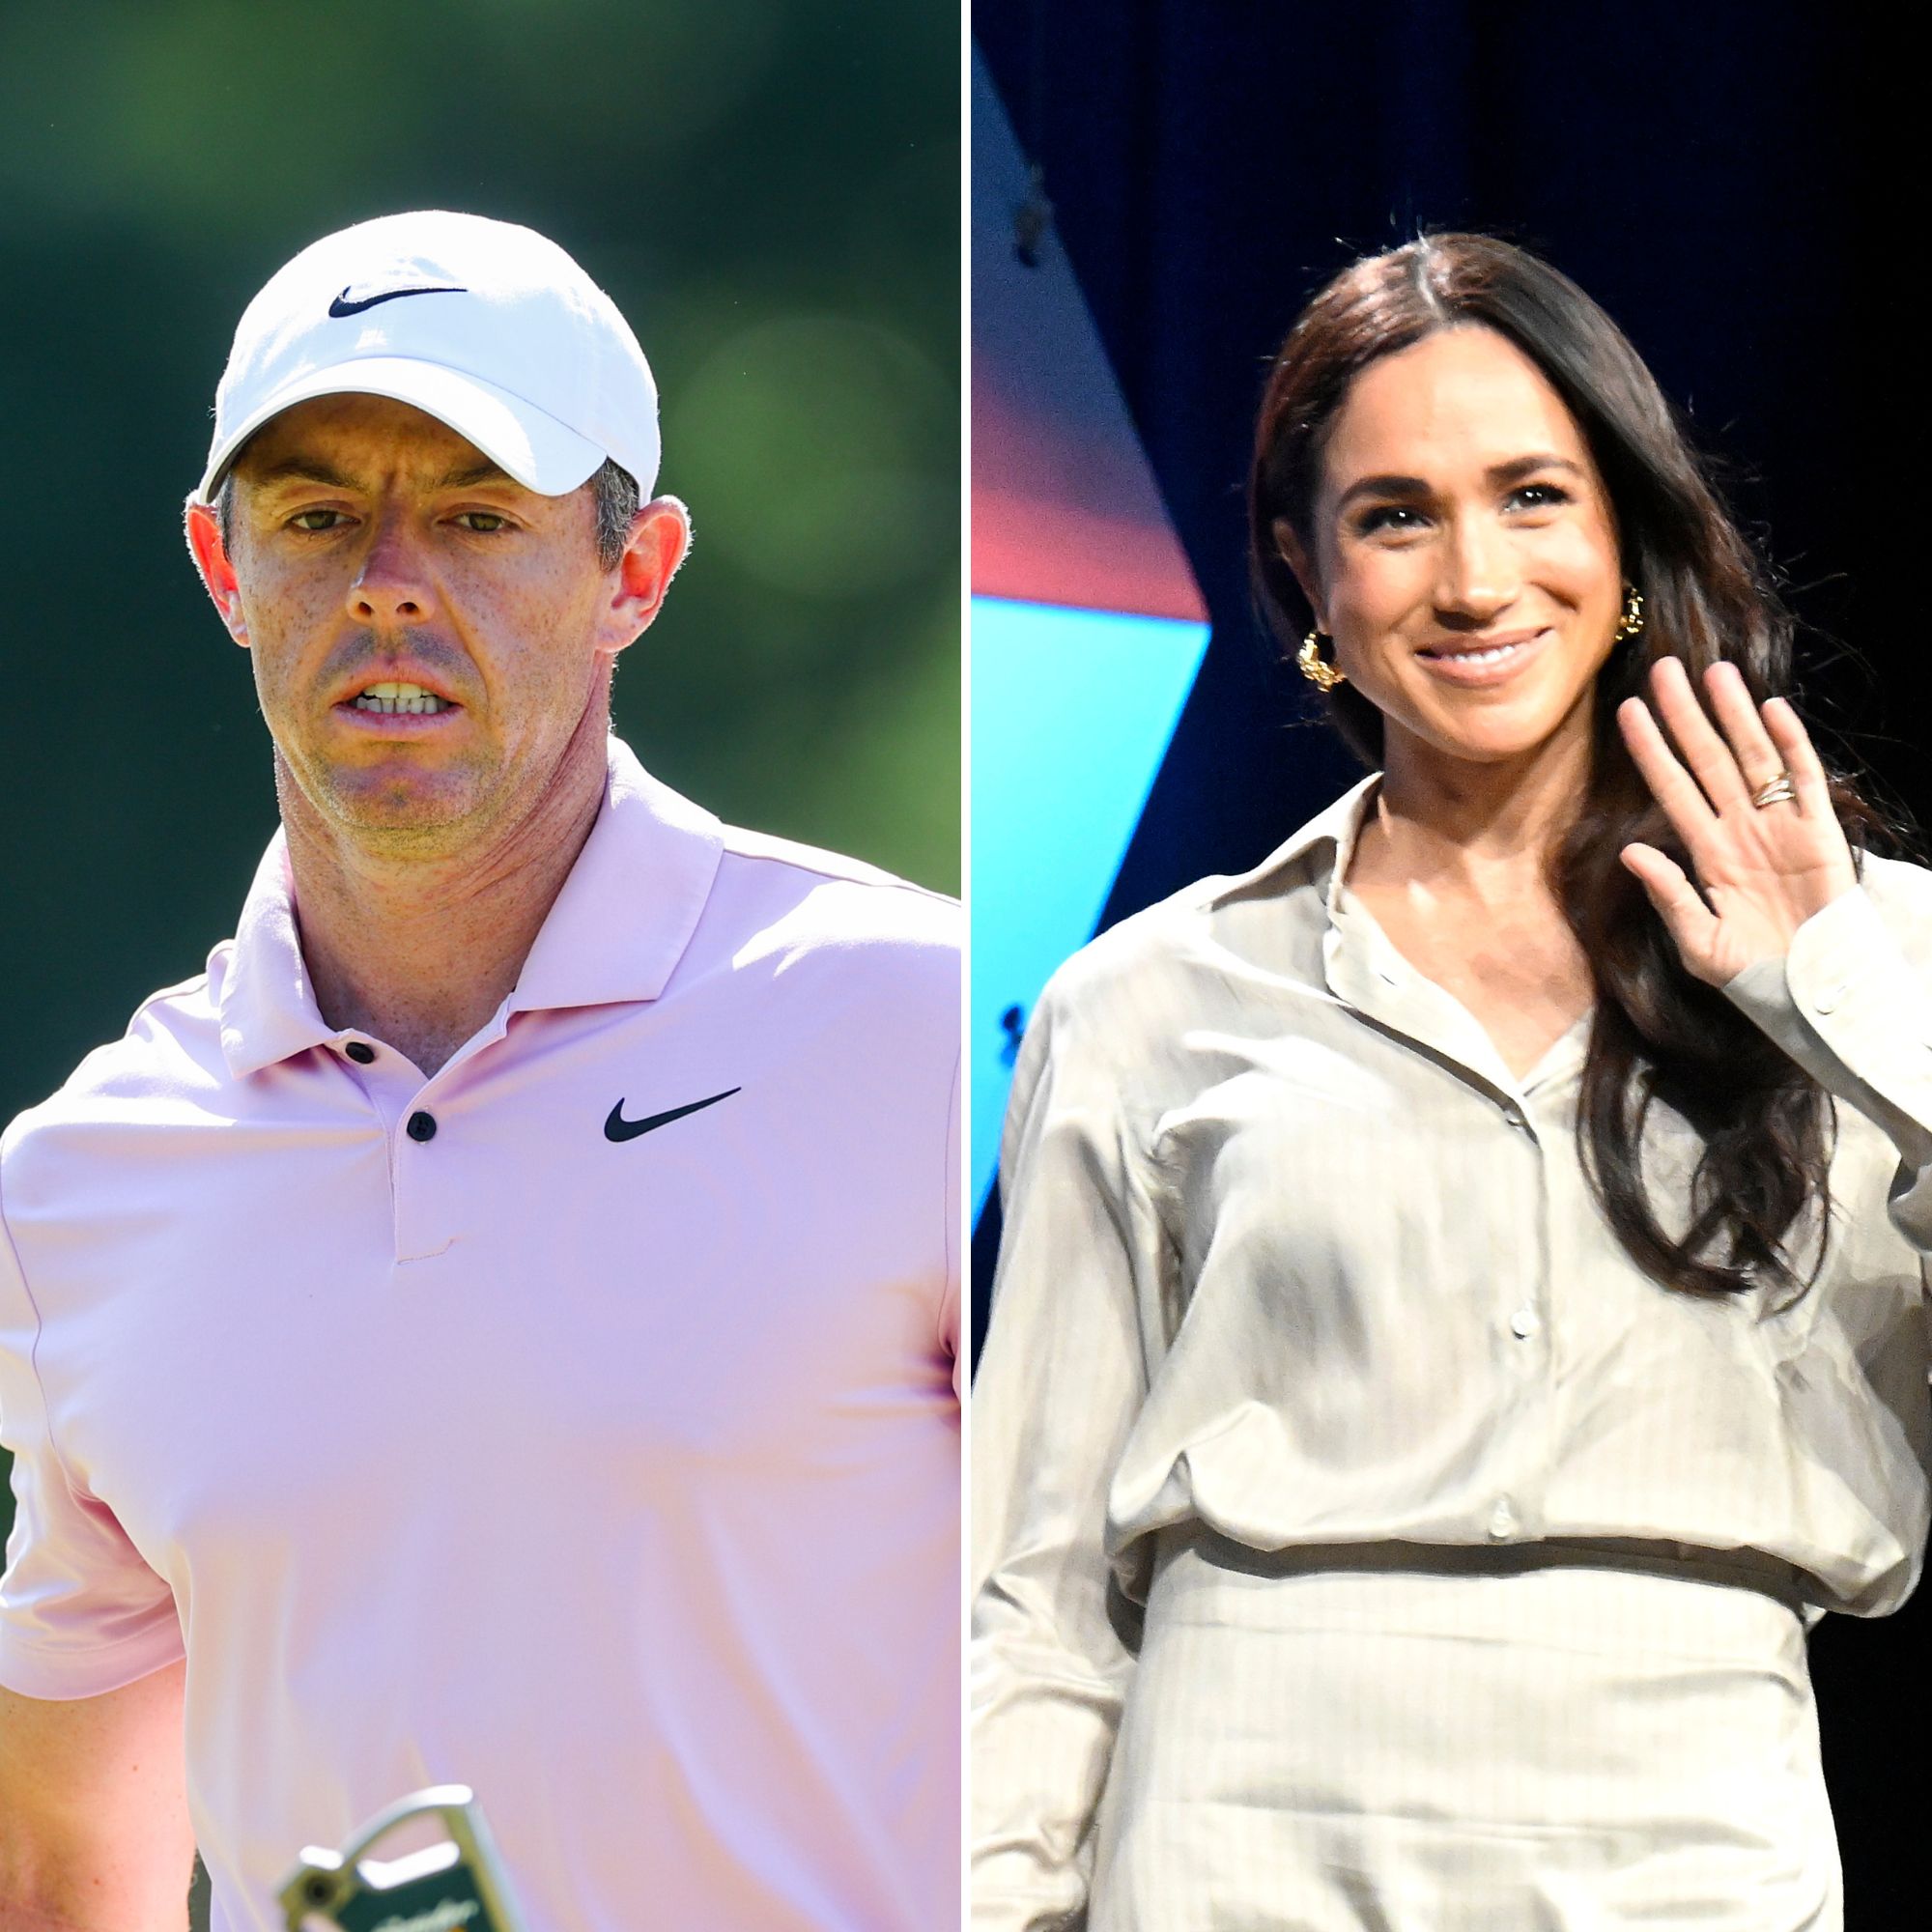 Rory McIlroy’s Dating History: His Past Exes, Fiance, Wife